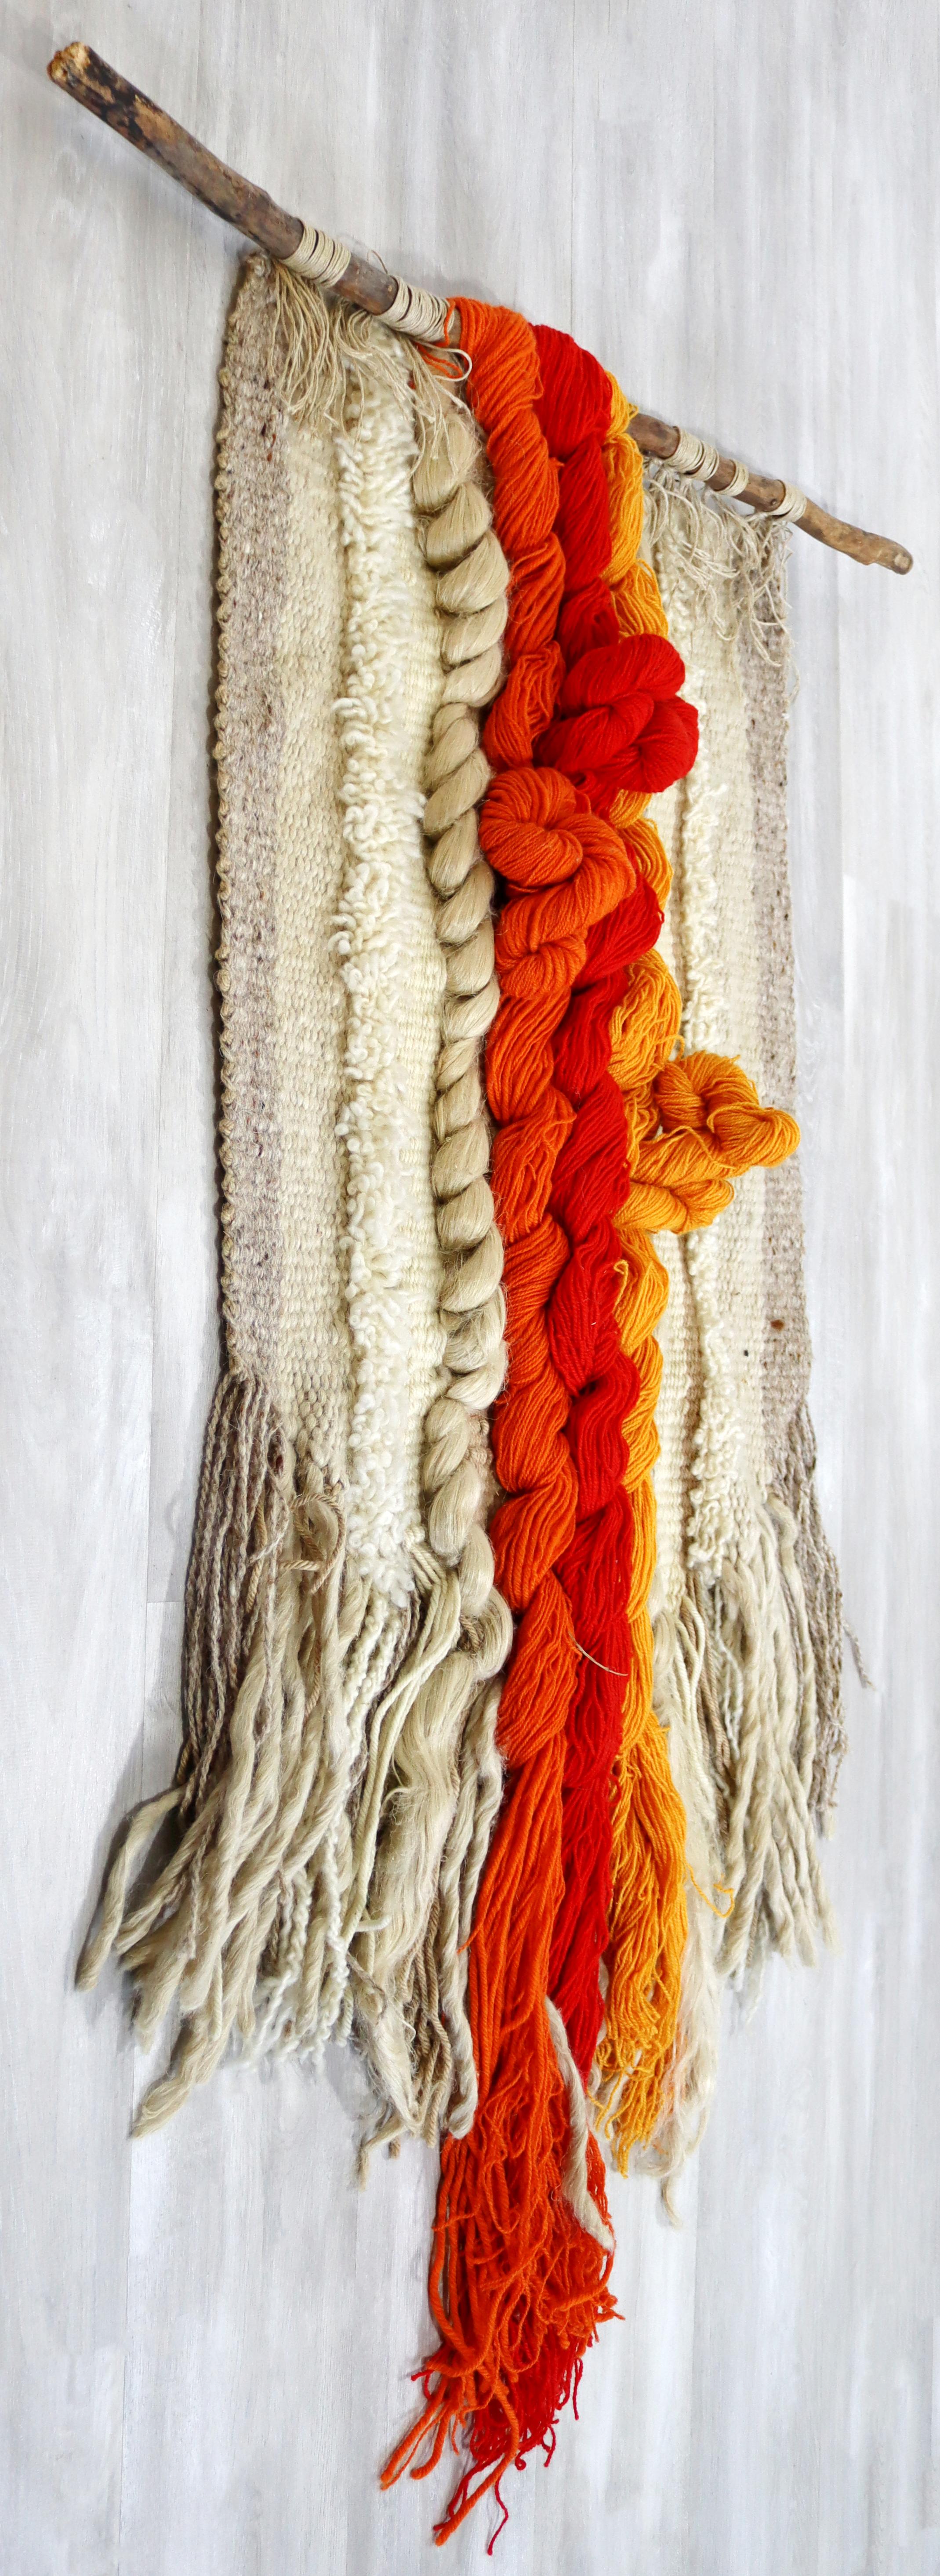 For your consideration is an incredibly fabulous, wool yarn fiber art wall sculpture, hung by a wooden stick, circa the 1970s. In excellent vintage condition. The dimensions are 36